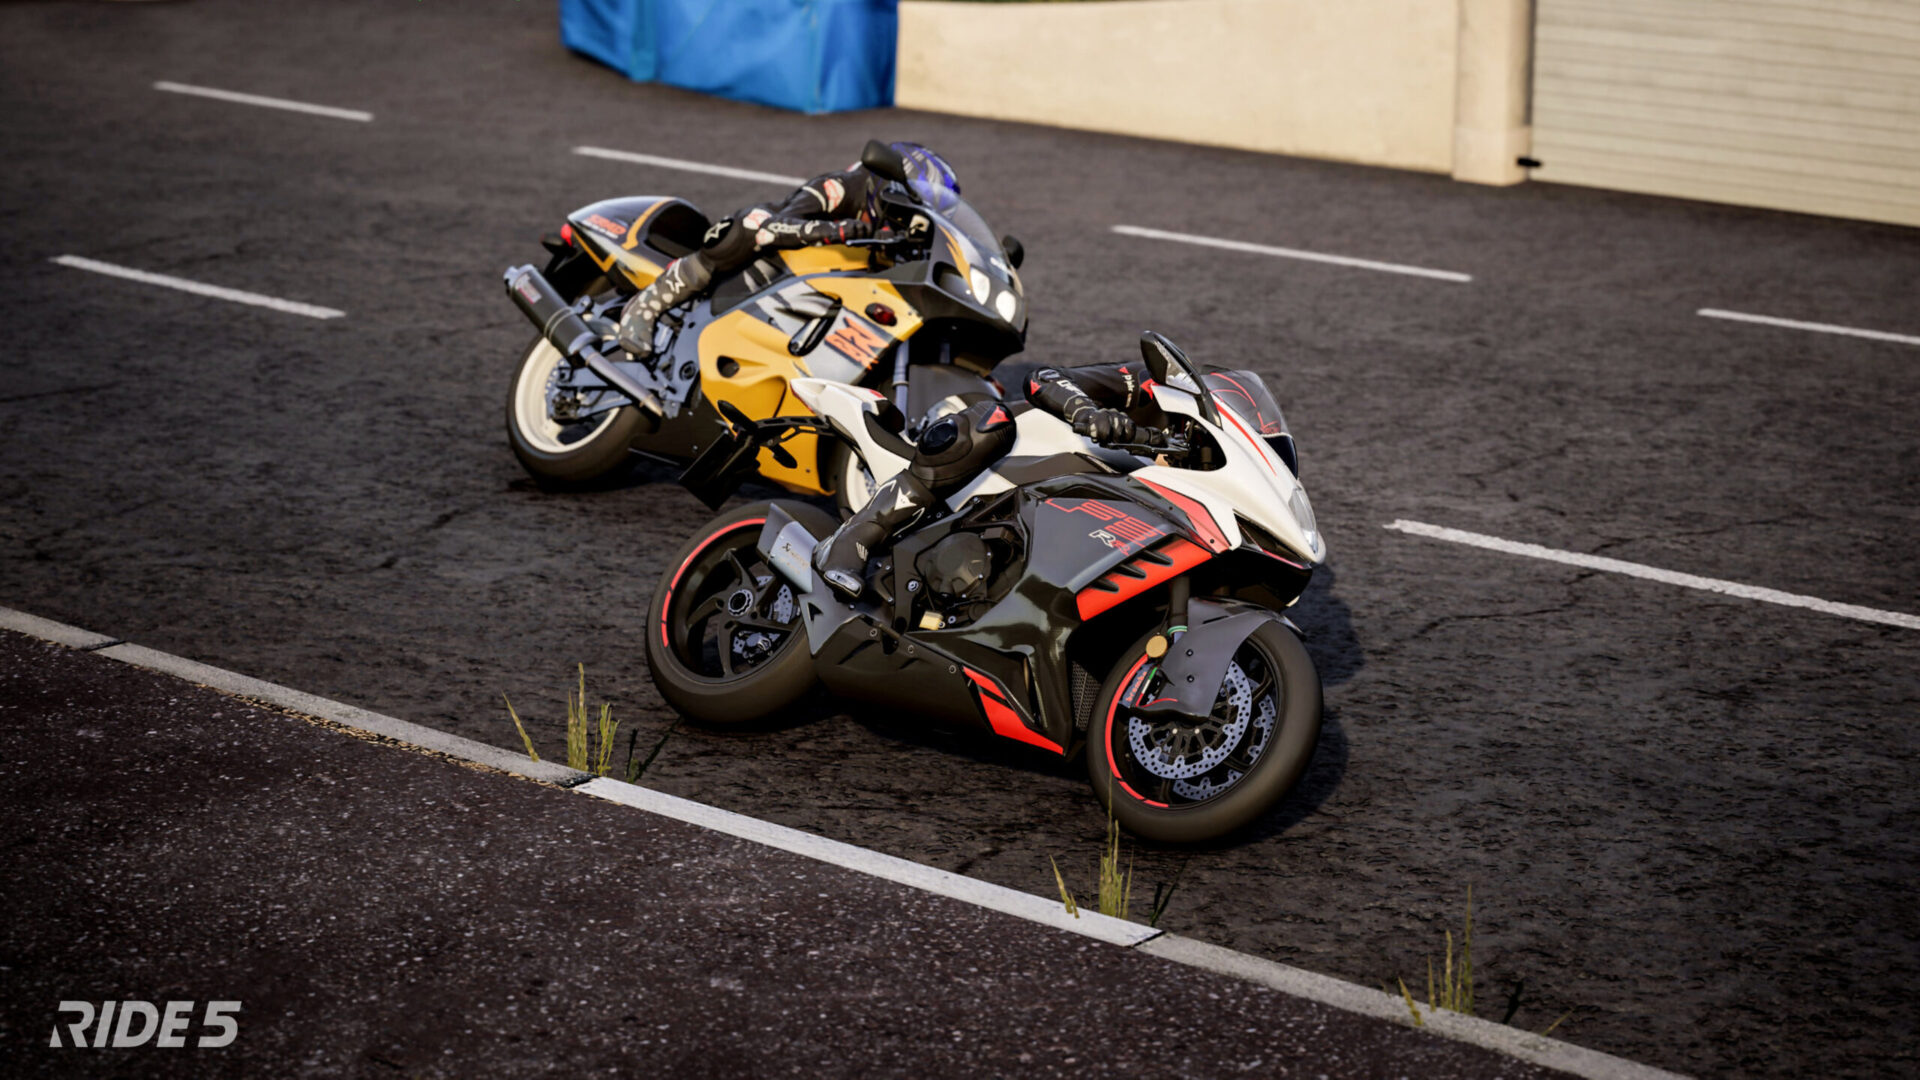 RIDE 5 Announced by Milestone, Launches August 24th - Insider Gaming